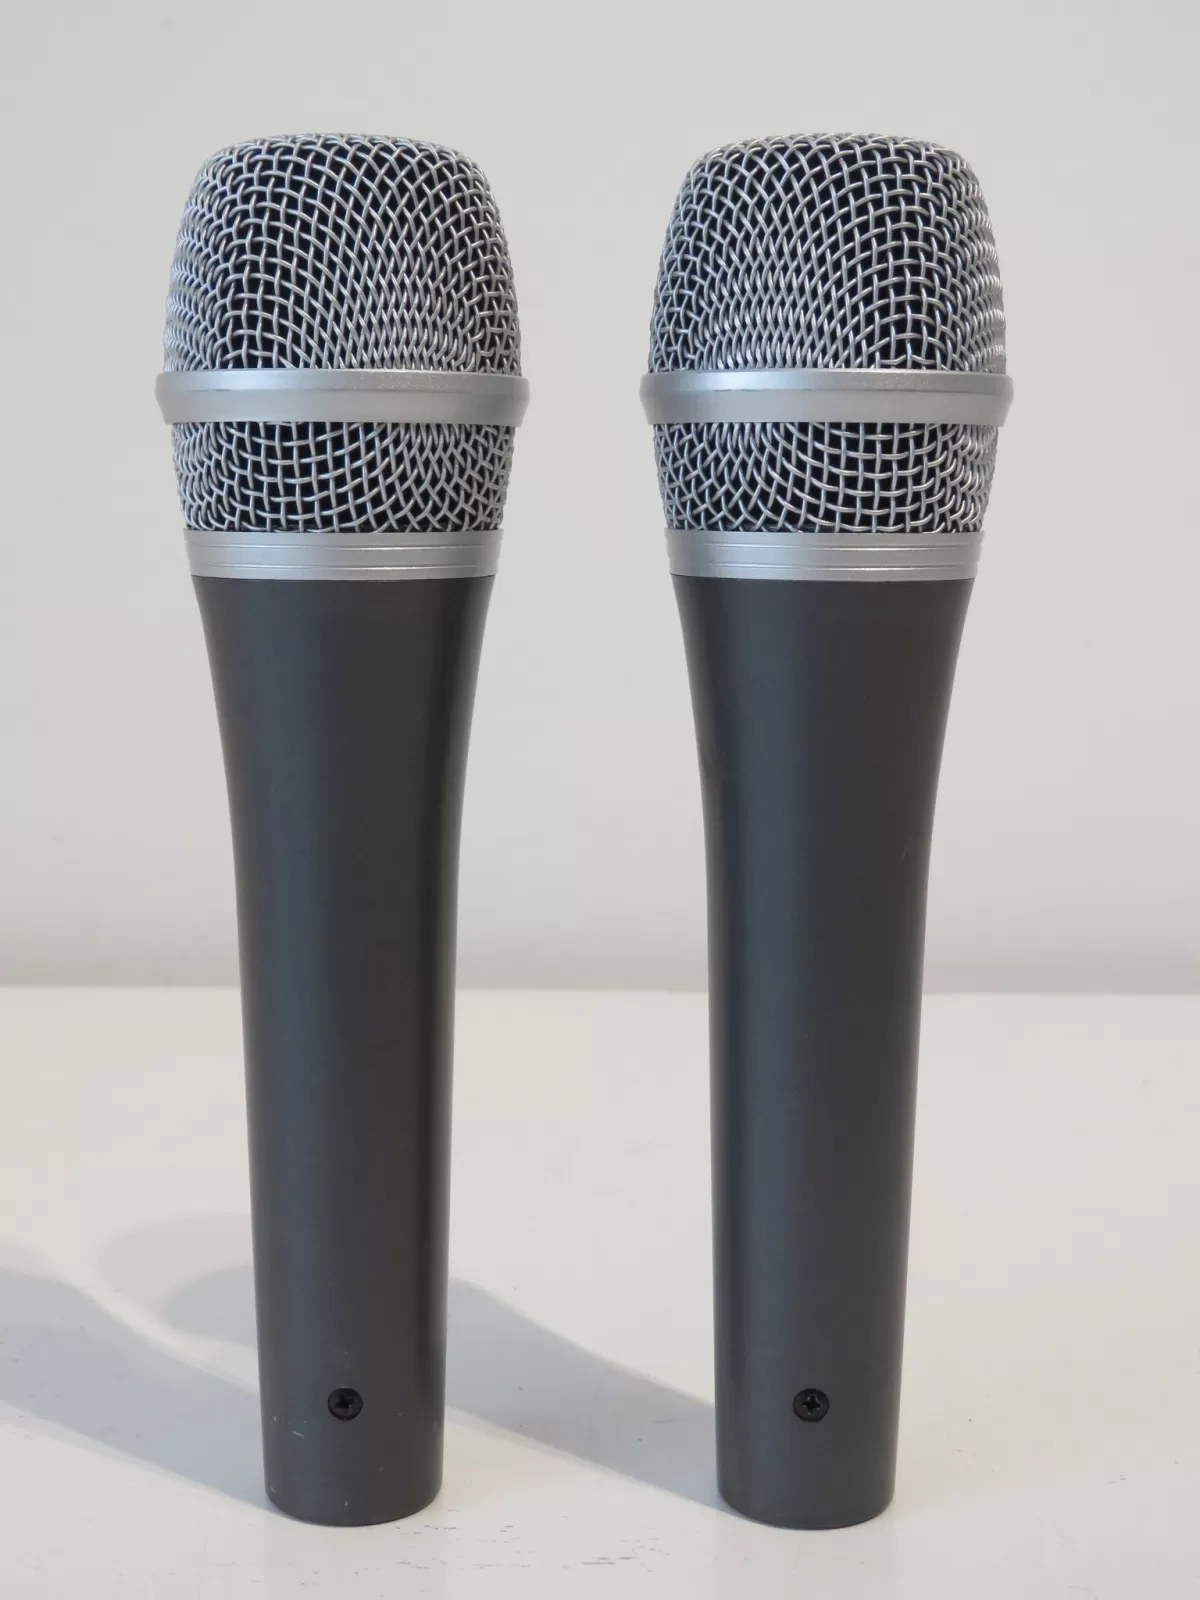 Star Singer 702 Karaoke Mics Switched Vocal Microphones - Pair